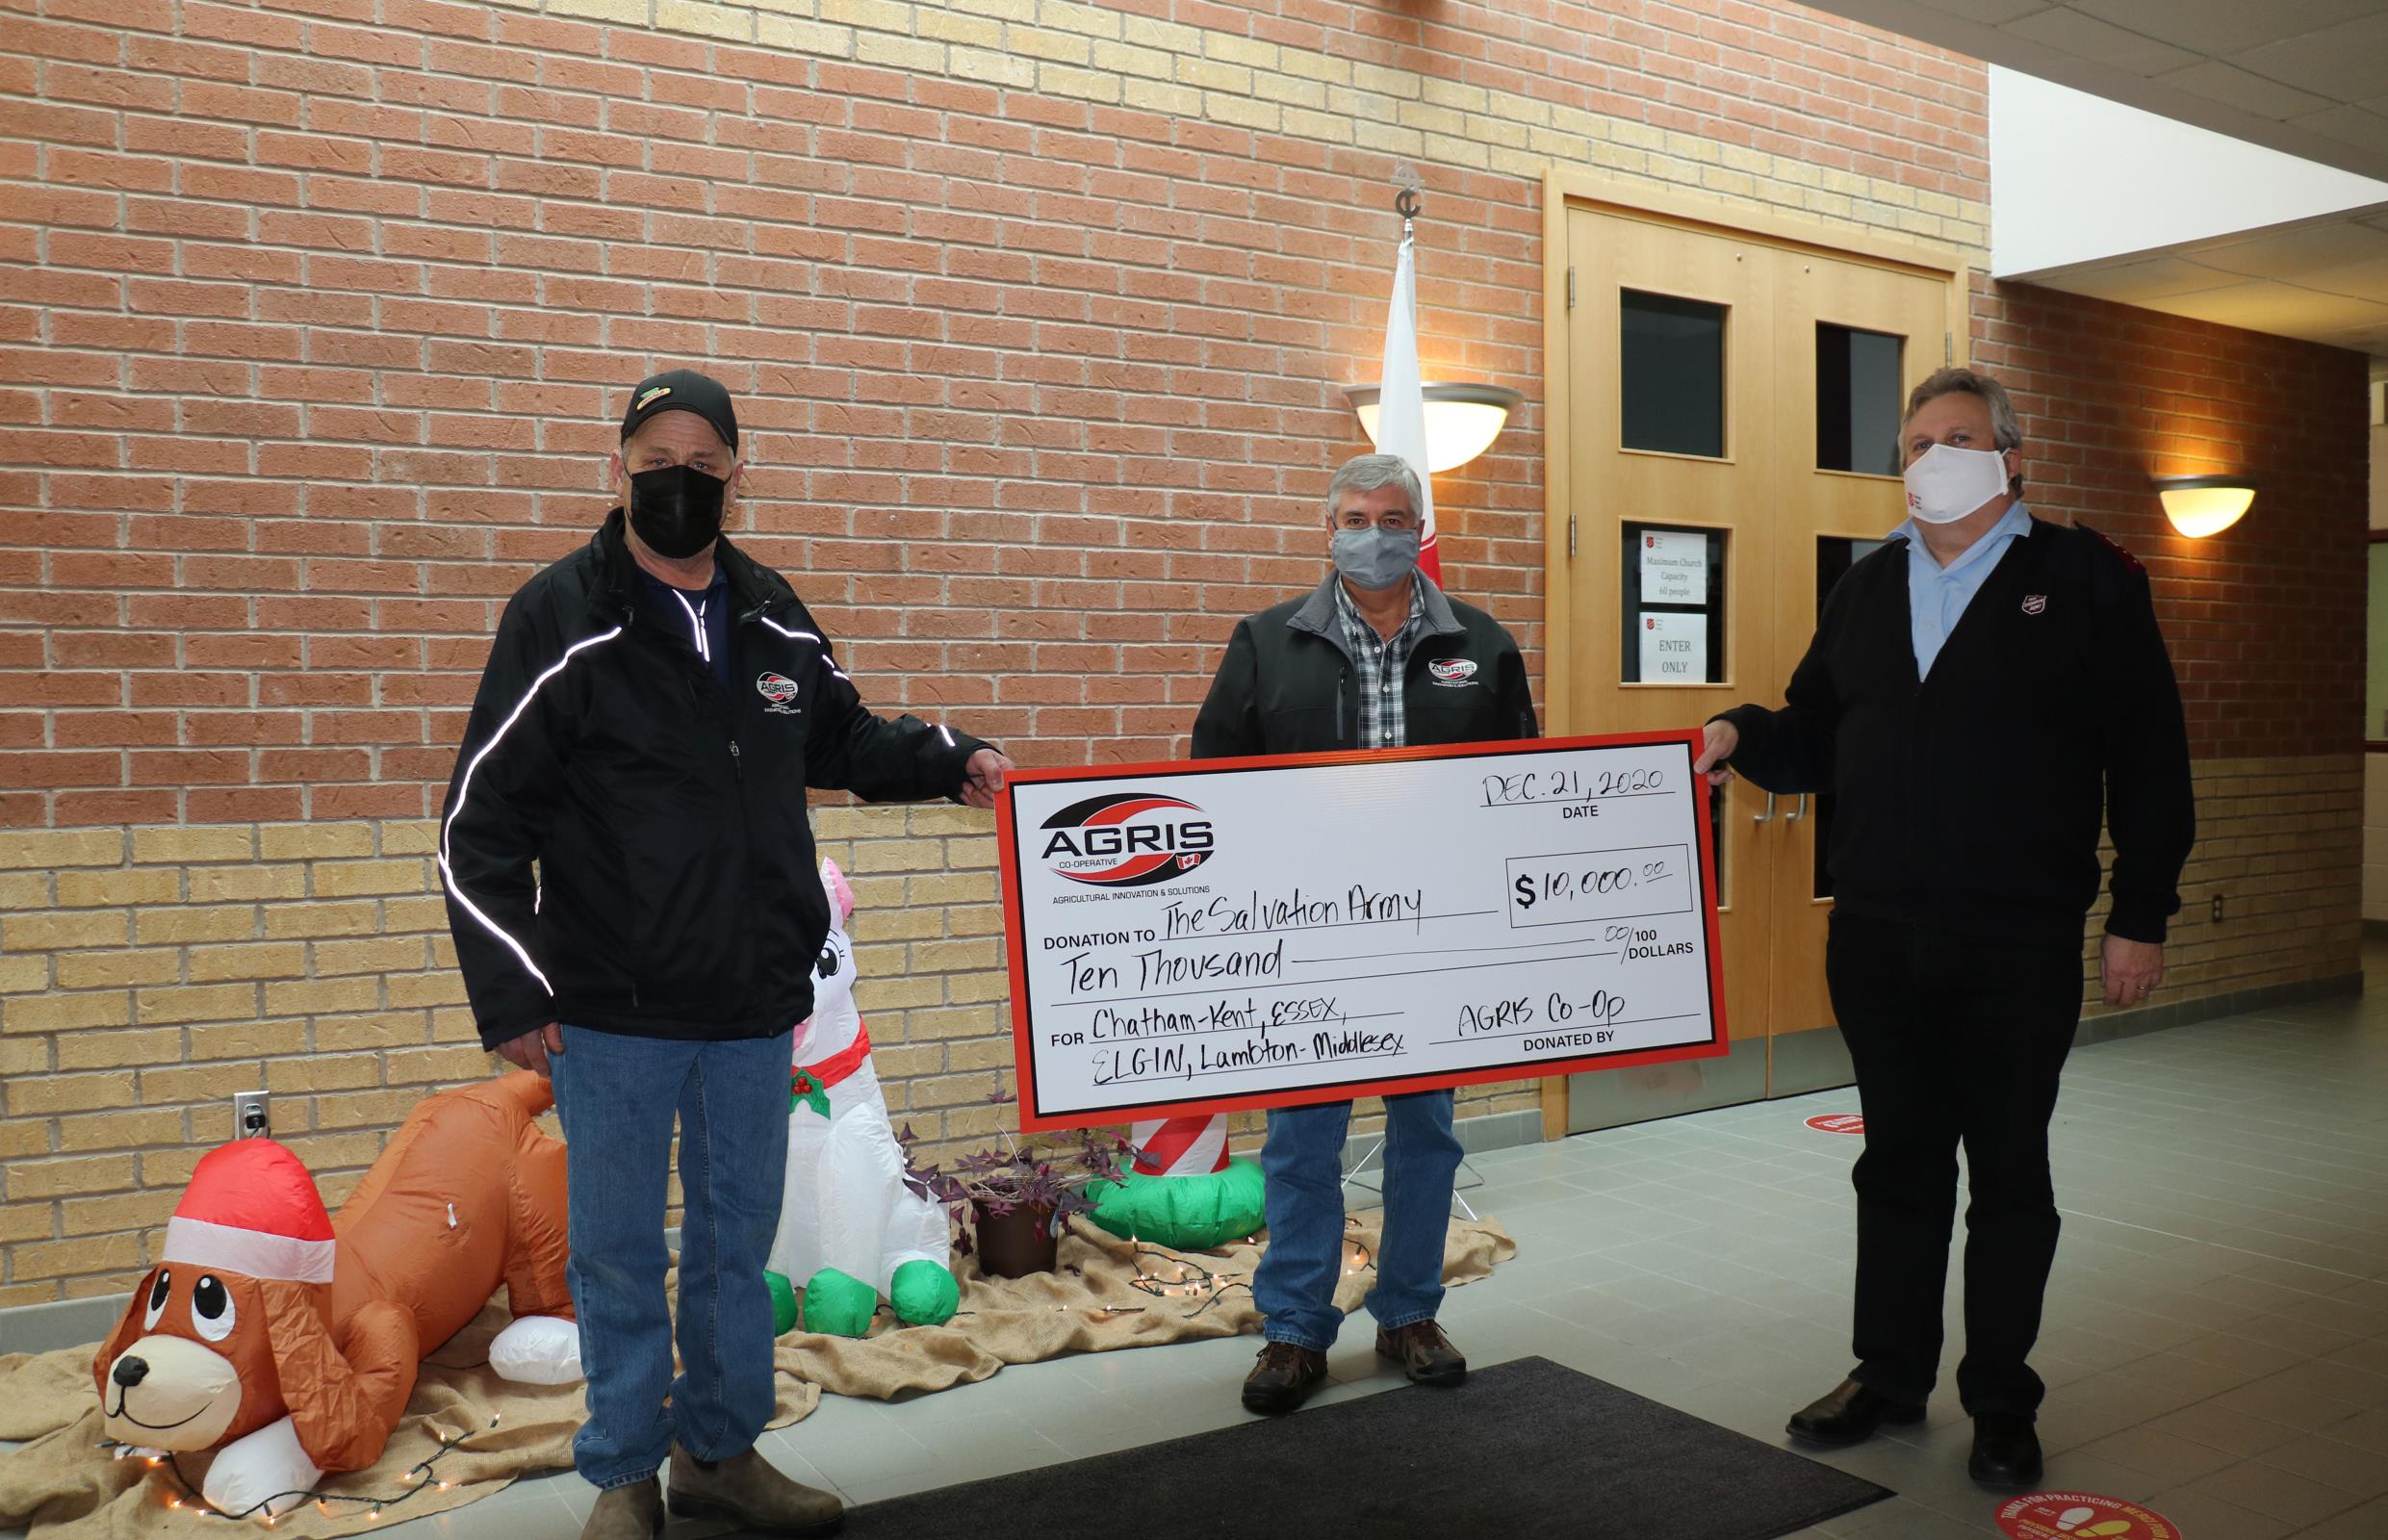 AGRIS Co-operative donates $10,000 to The Salvation Army’s Red Kettle campaign across Southwestern Ontario